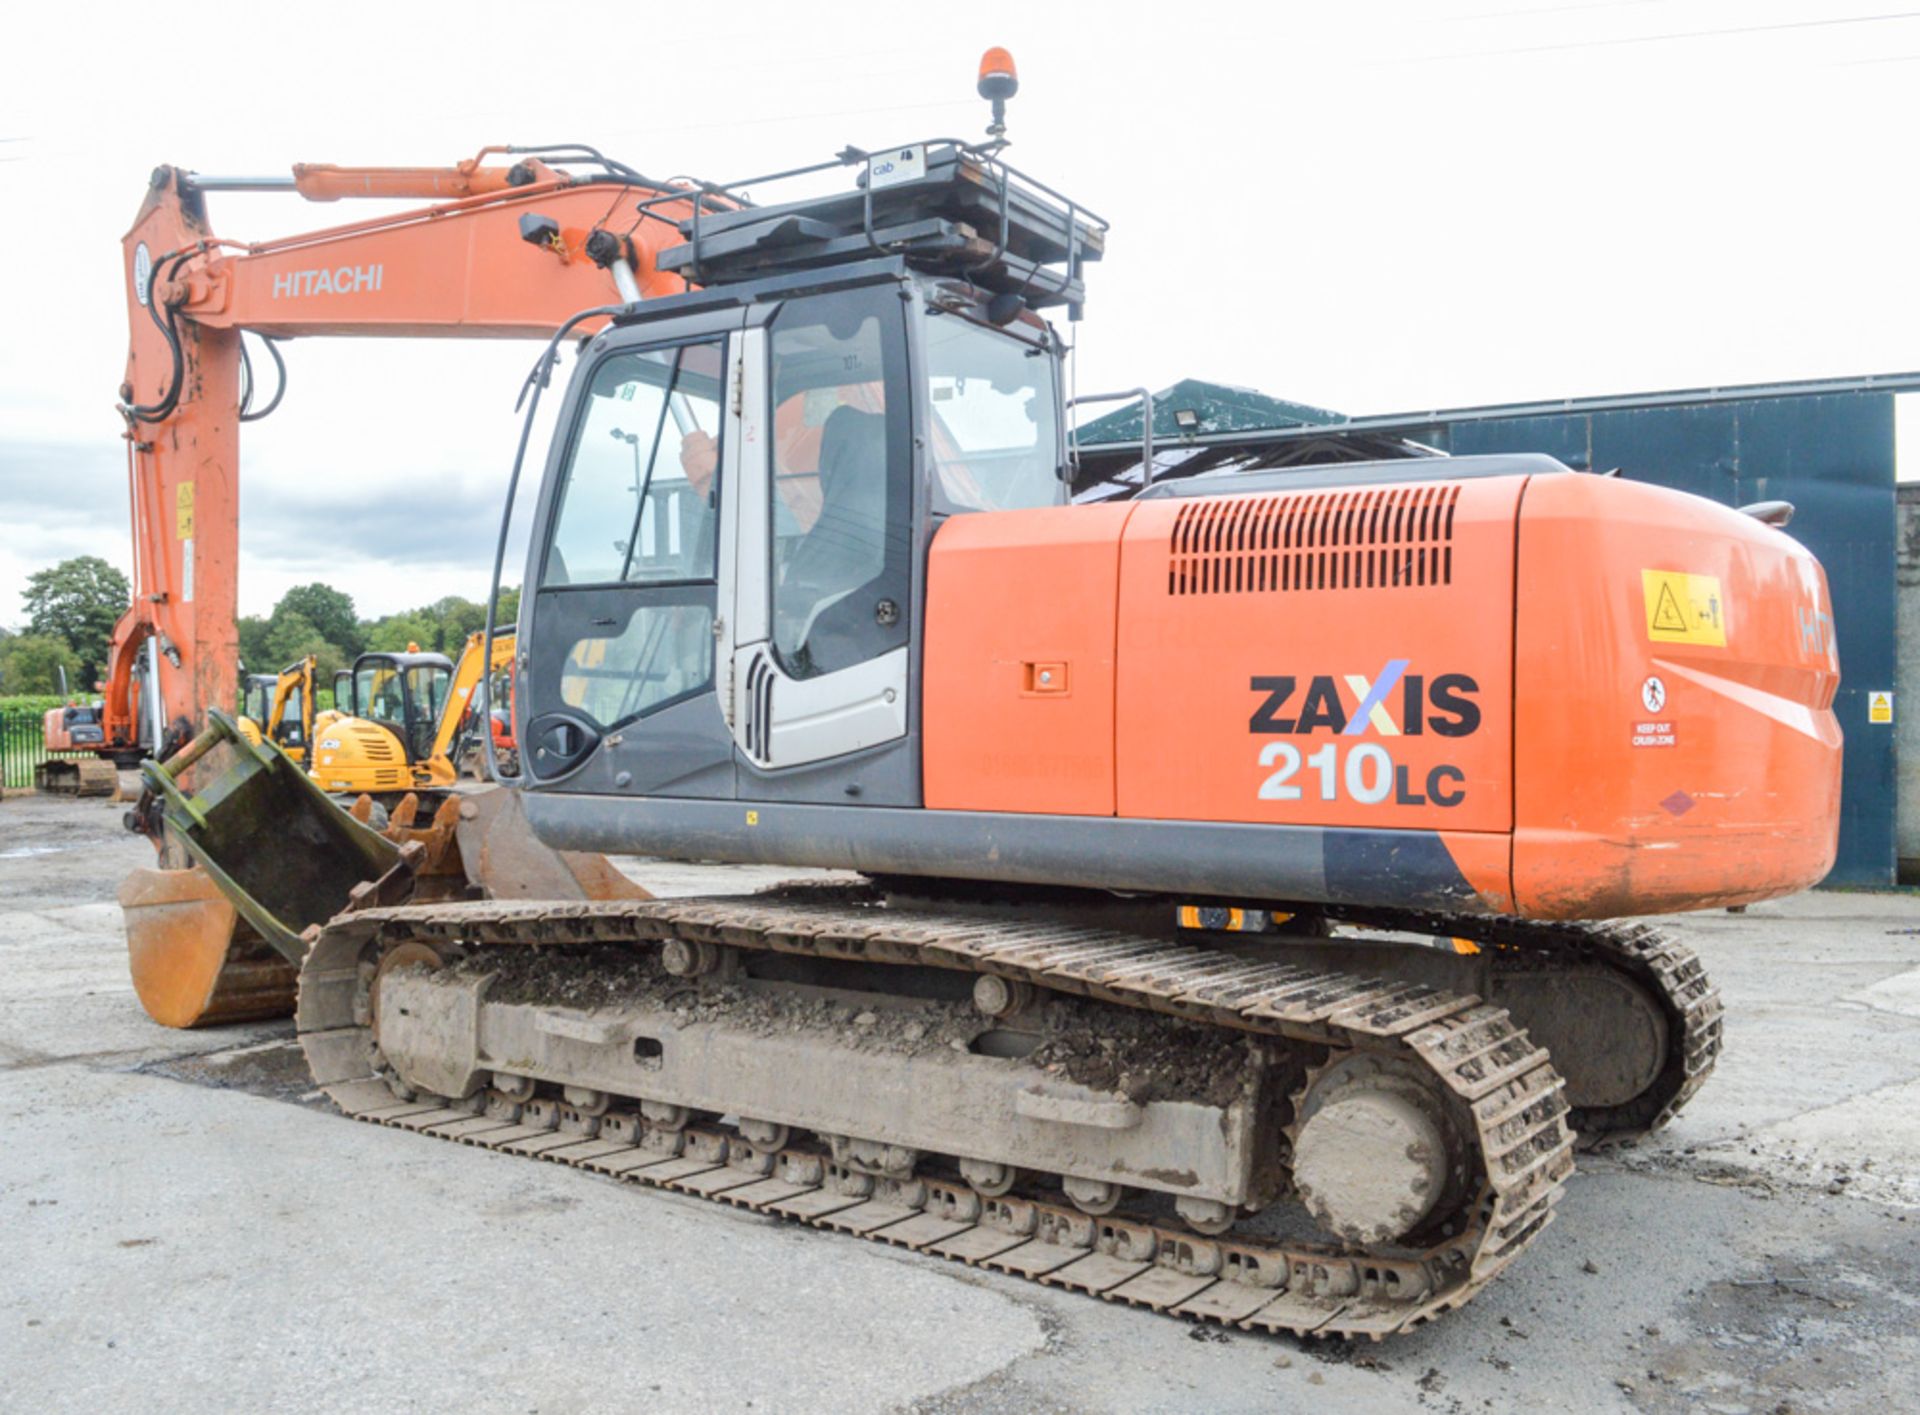 Hitachi Zaxis 210LC 21 tonne steel tracked excavator Year: 2008 S/N: 601306 Recorded Hours: 6876 - Image 2 of 15